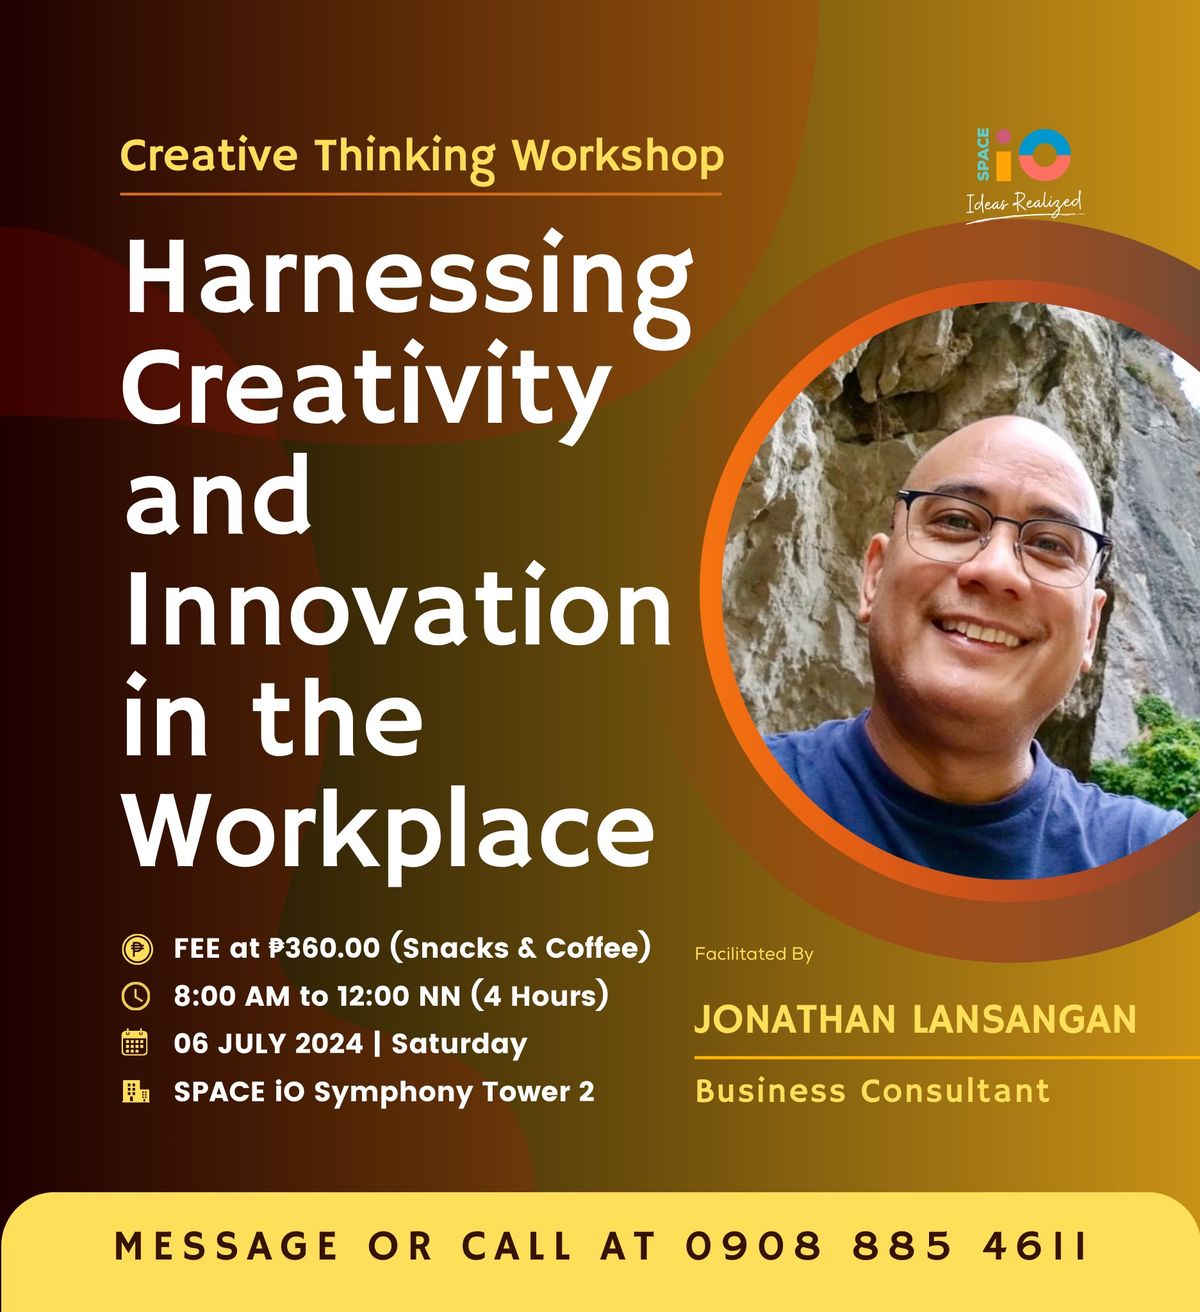 Creative Thinking Workshop: Harnessing Creativity and Innovation in the Workplace